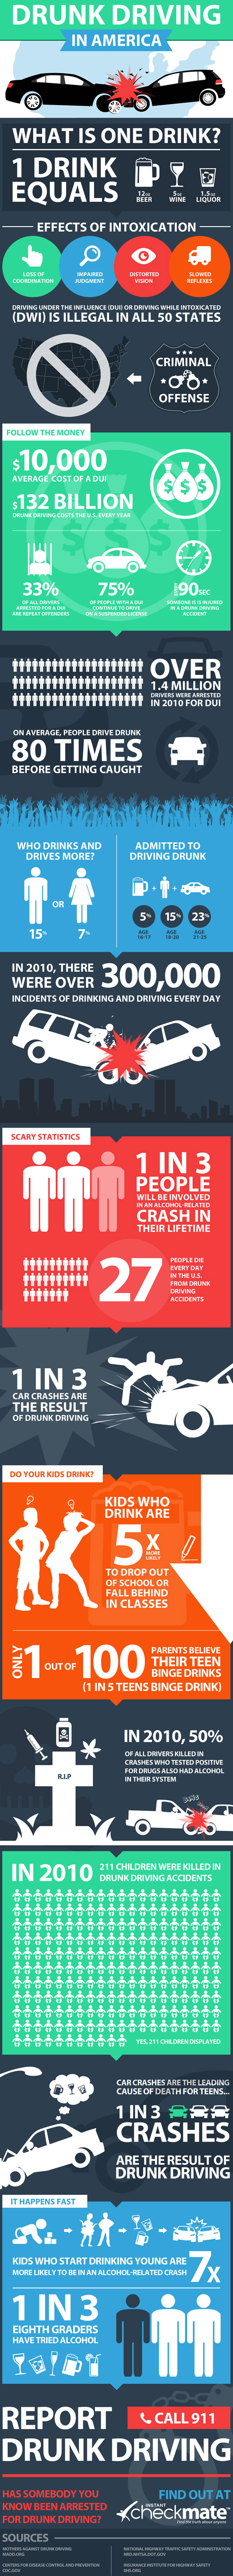 Facts About Drunk Driving